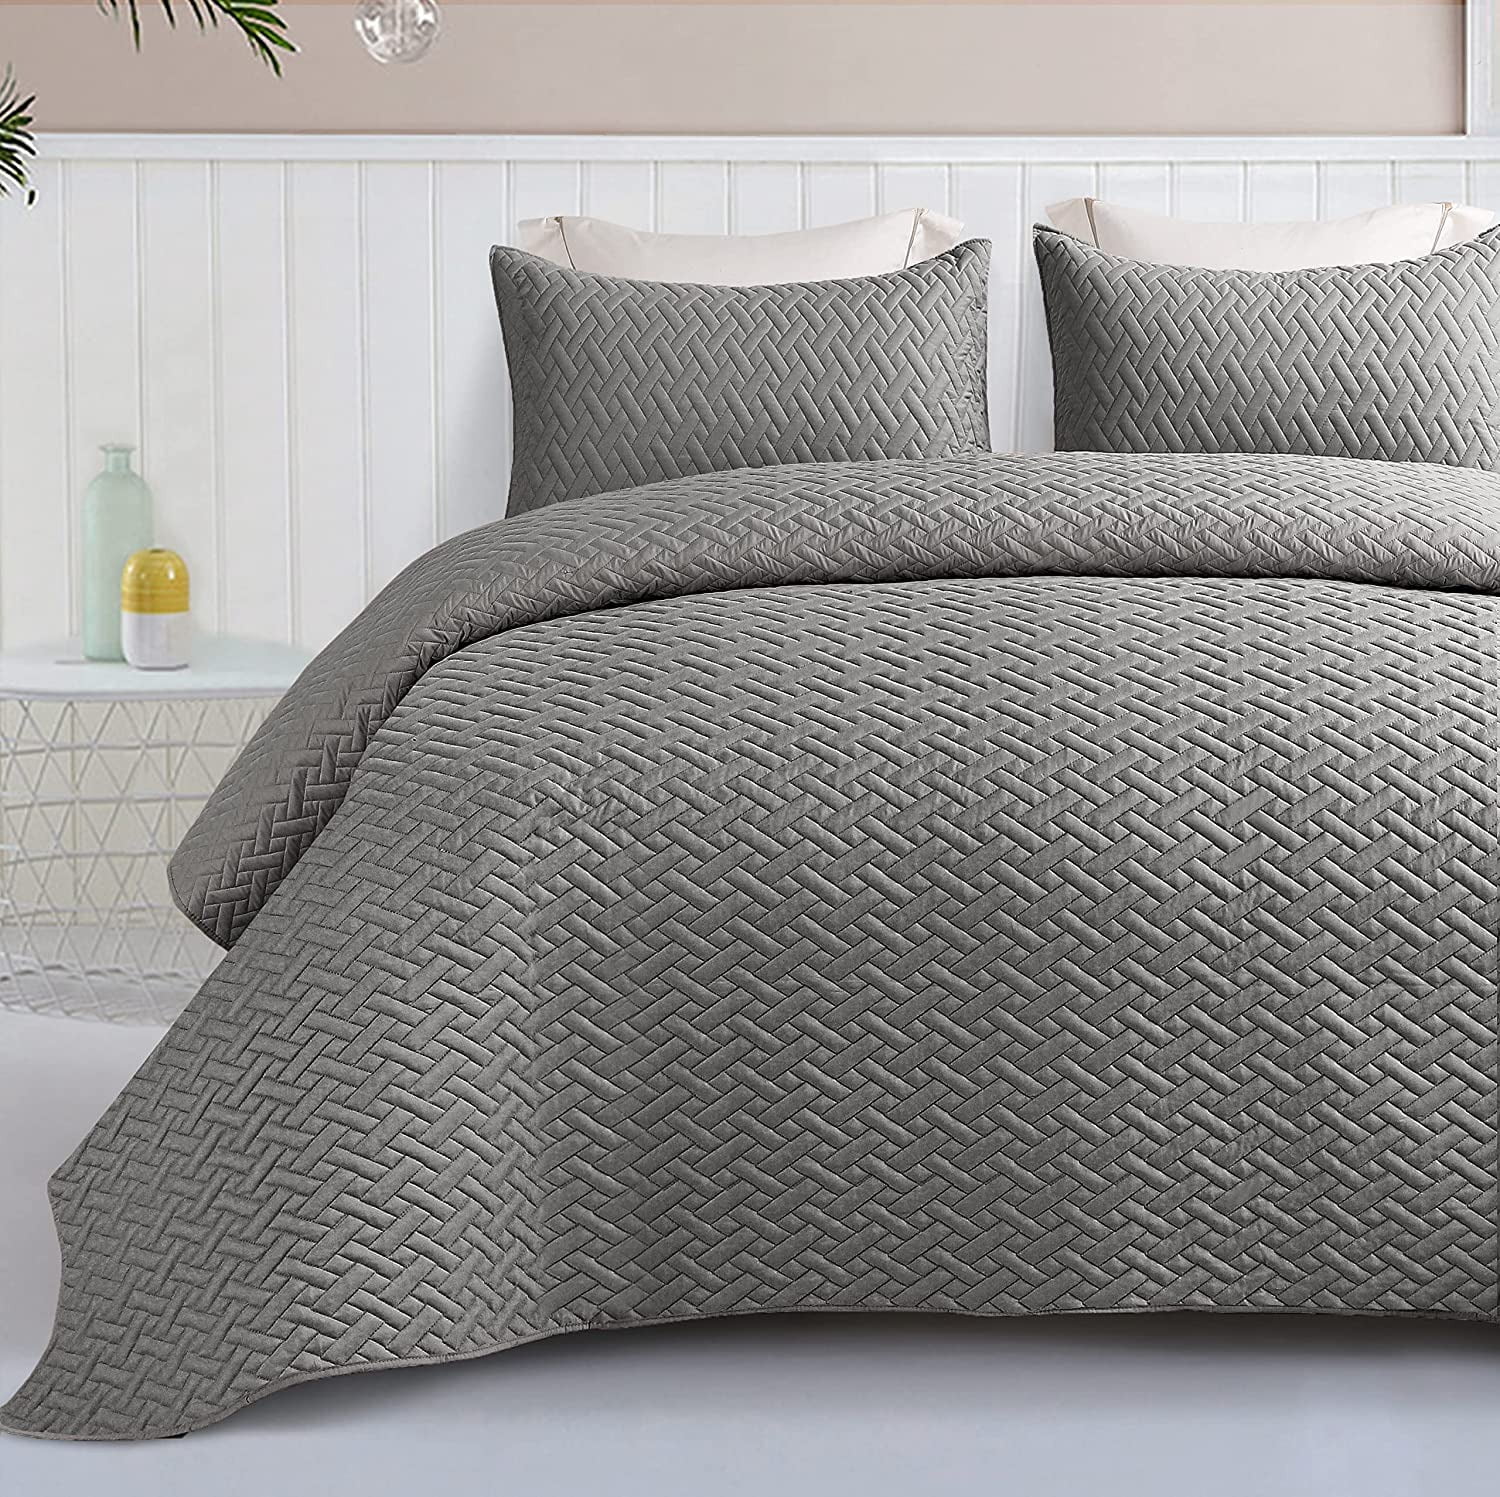 Exclusivo Mezcla 2-Piece Twin Size Quilt Set with One Pillow Sham, Basket Quilted Bedspread/Coverlet/Bed Cover(68x88 inches, Light Grey)-Soft, Lightweight and Reversible